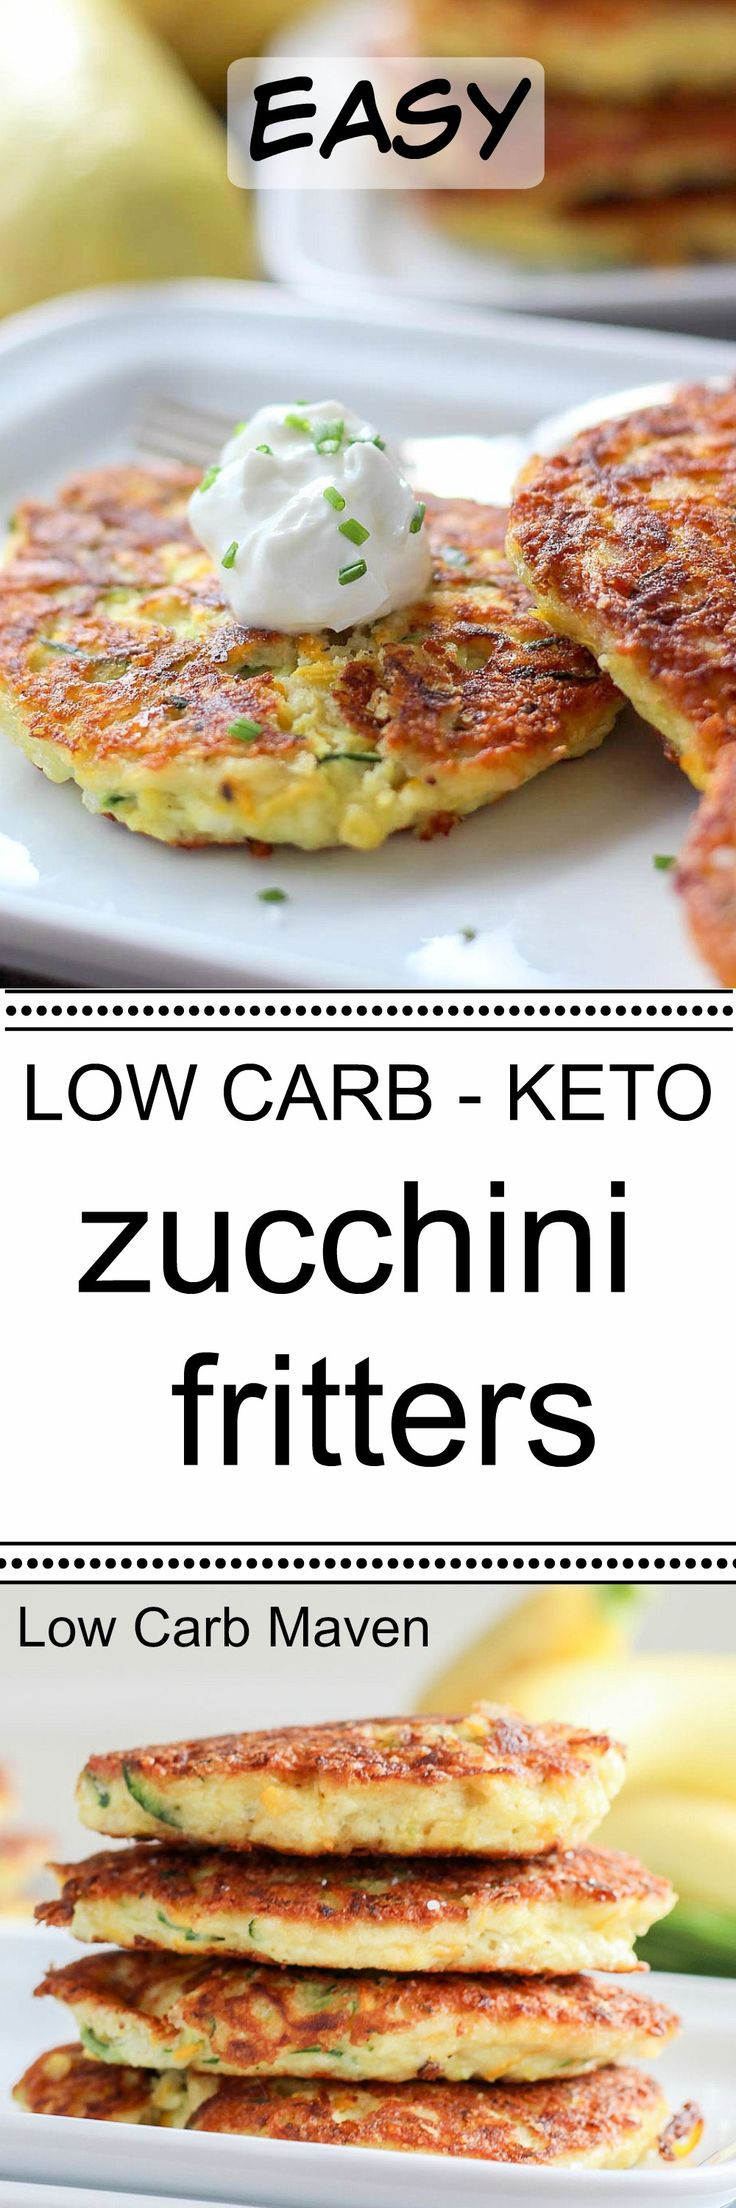 Easy Low Carb Vegetarian Recipes
 These easy zucchini fritters make a great lowcarb or keto